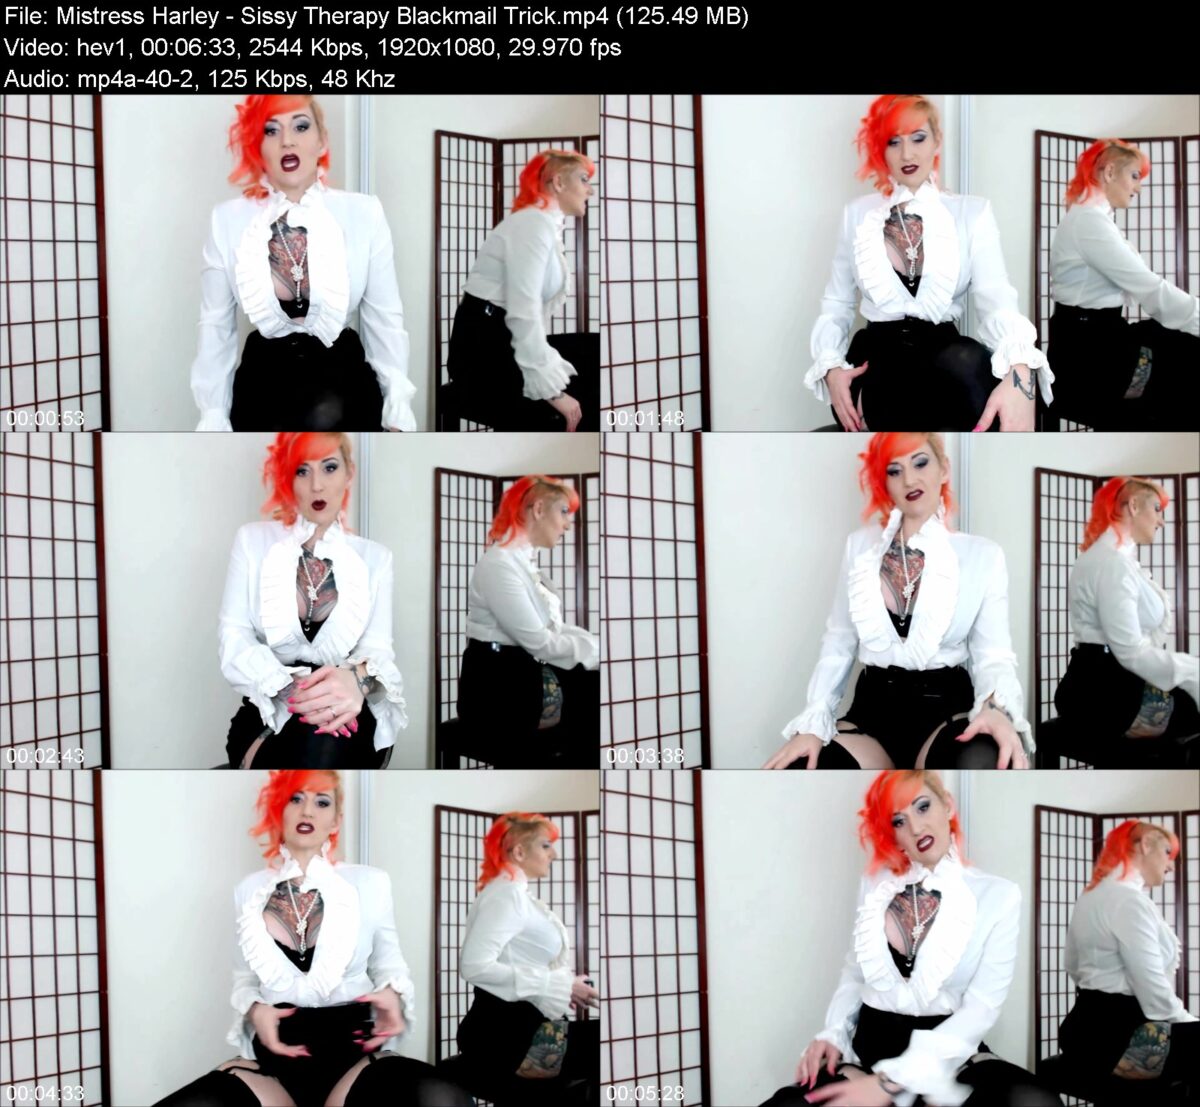 Actress: Mistress Harley. Title and Studio: Sissy Therapy Blackmail Trick